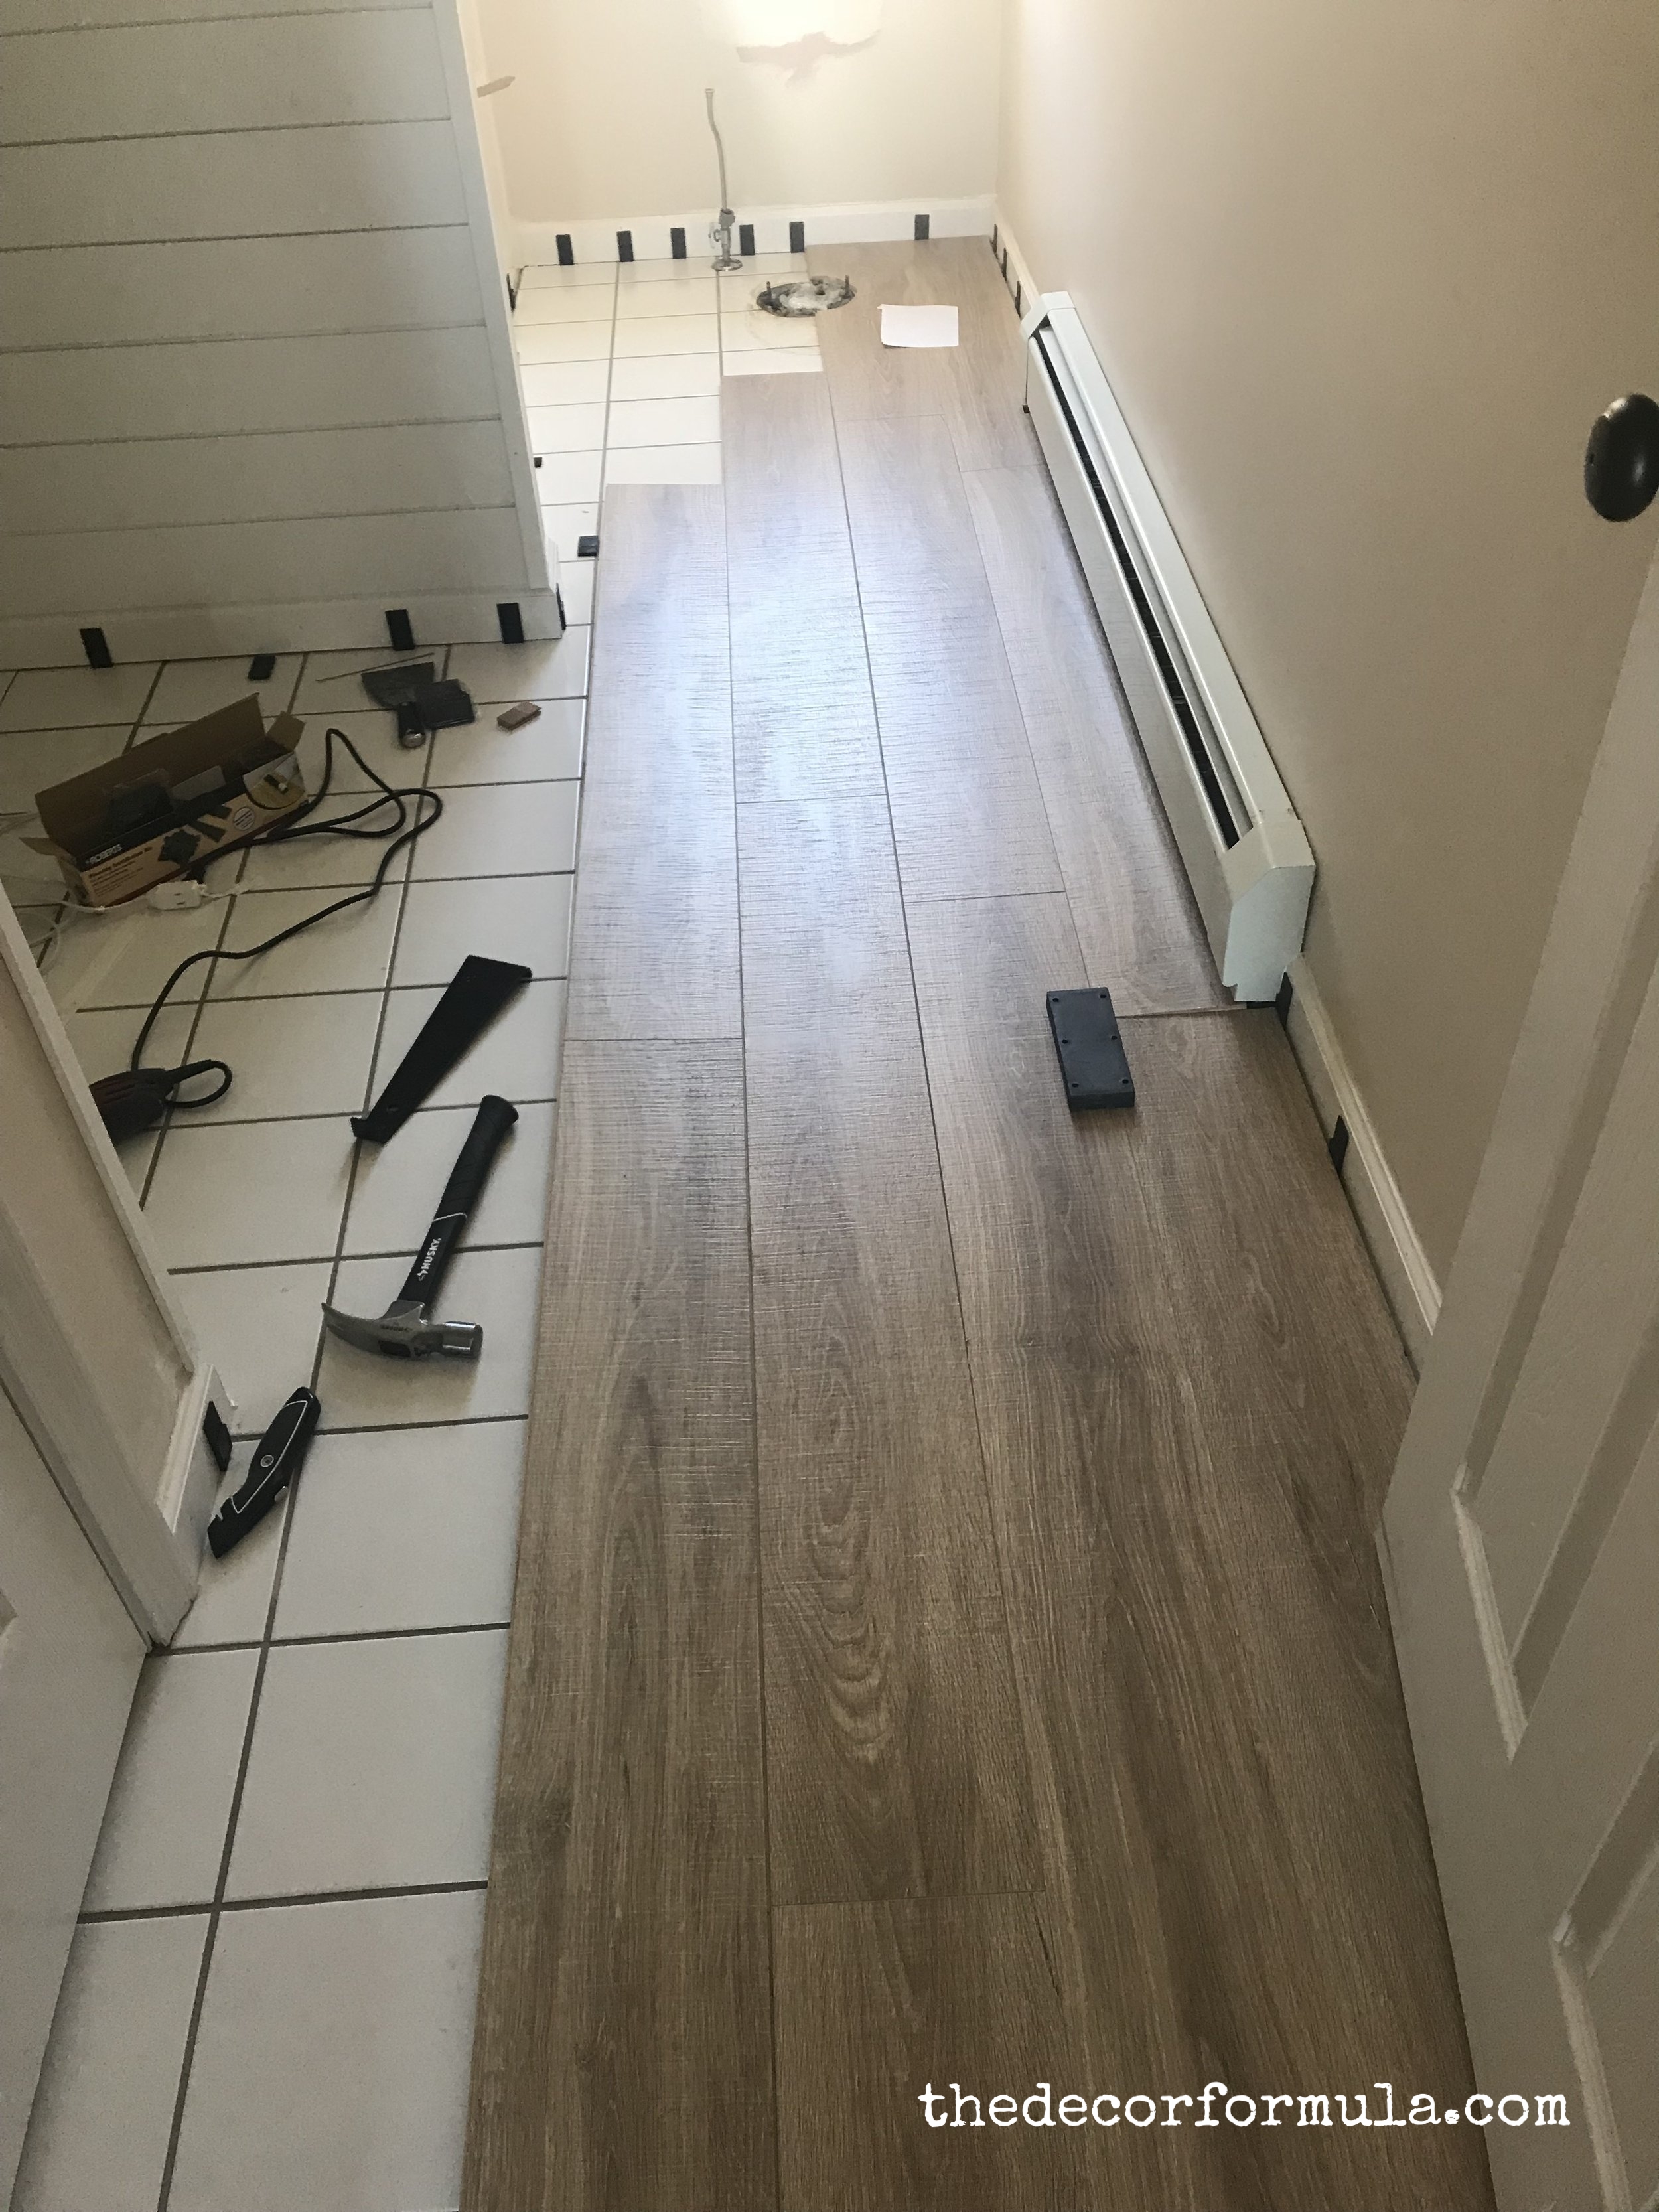 Ideas For Covering Up Tile Floors, Can You Lay Laminate Flooring On Tiles